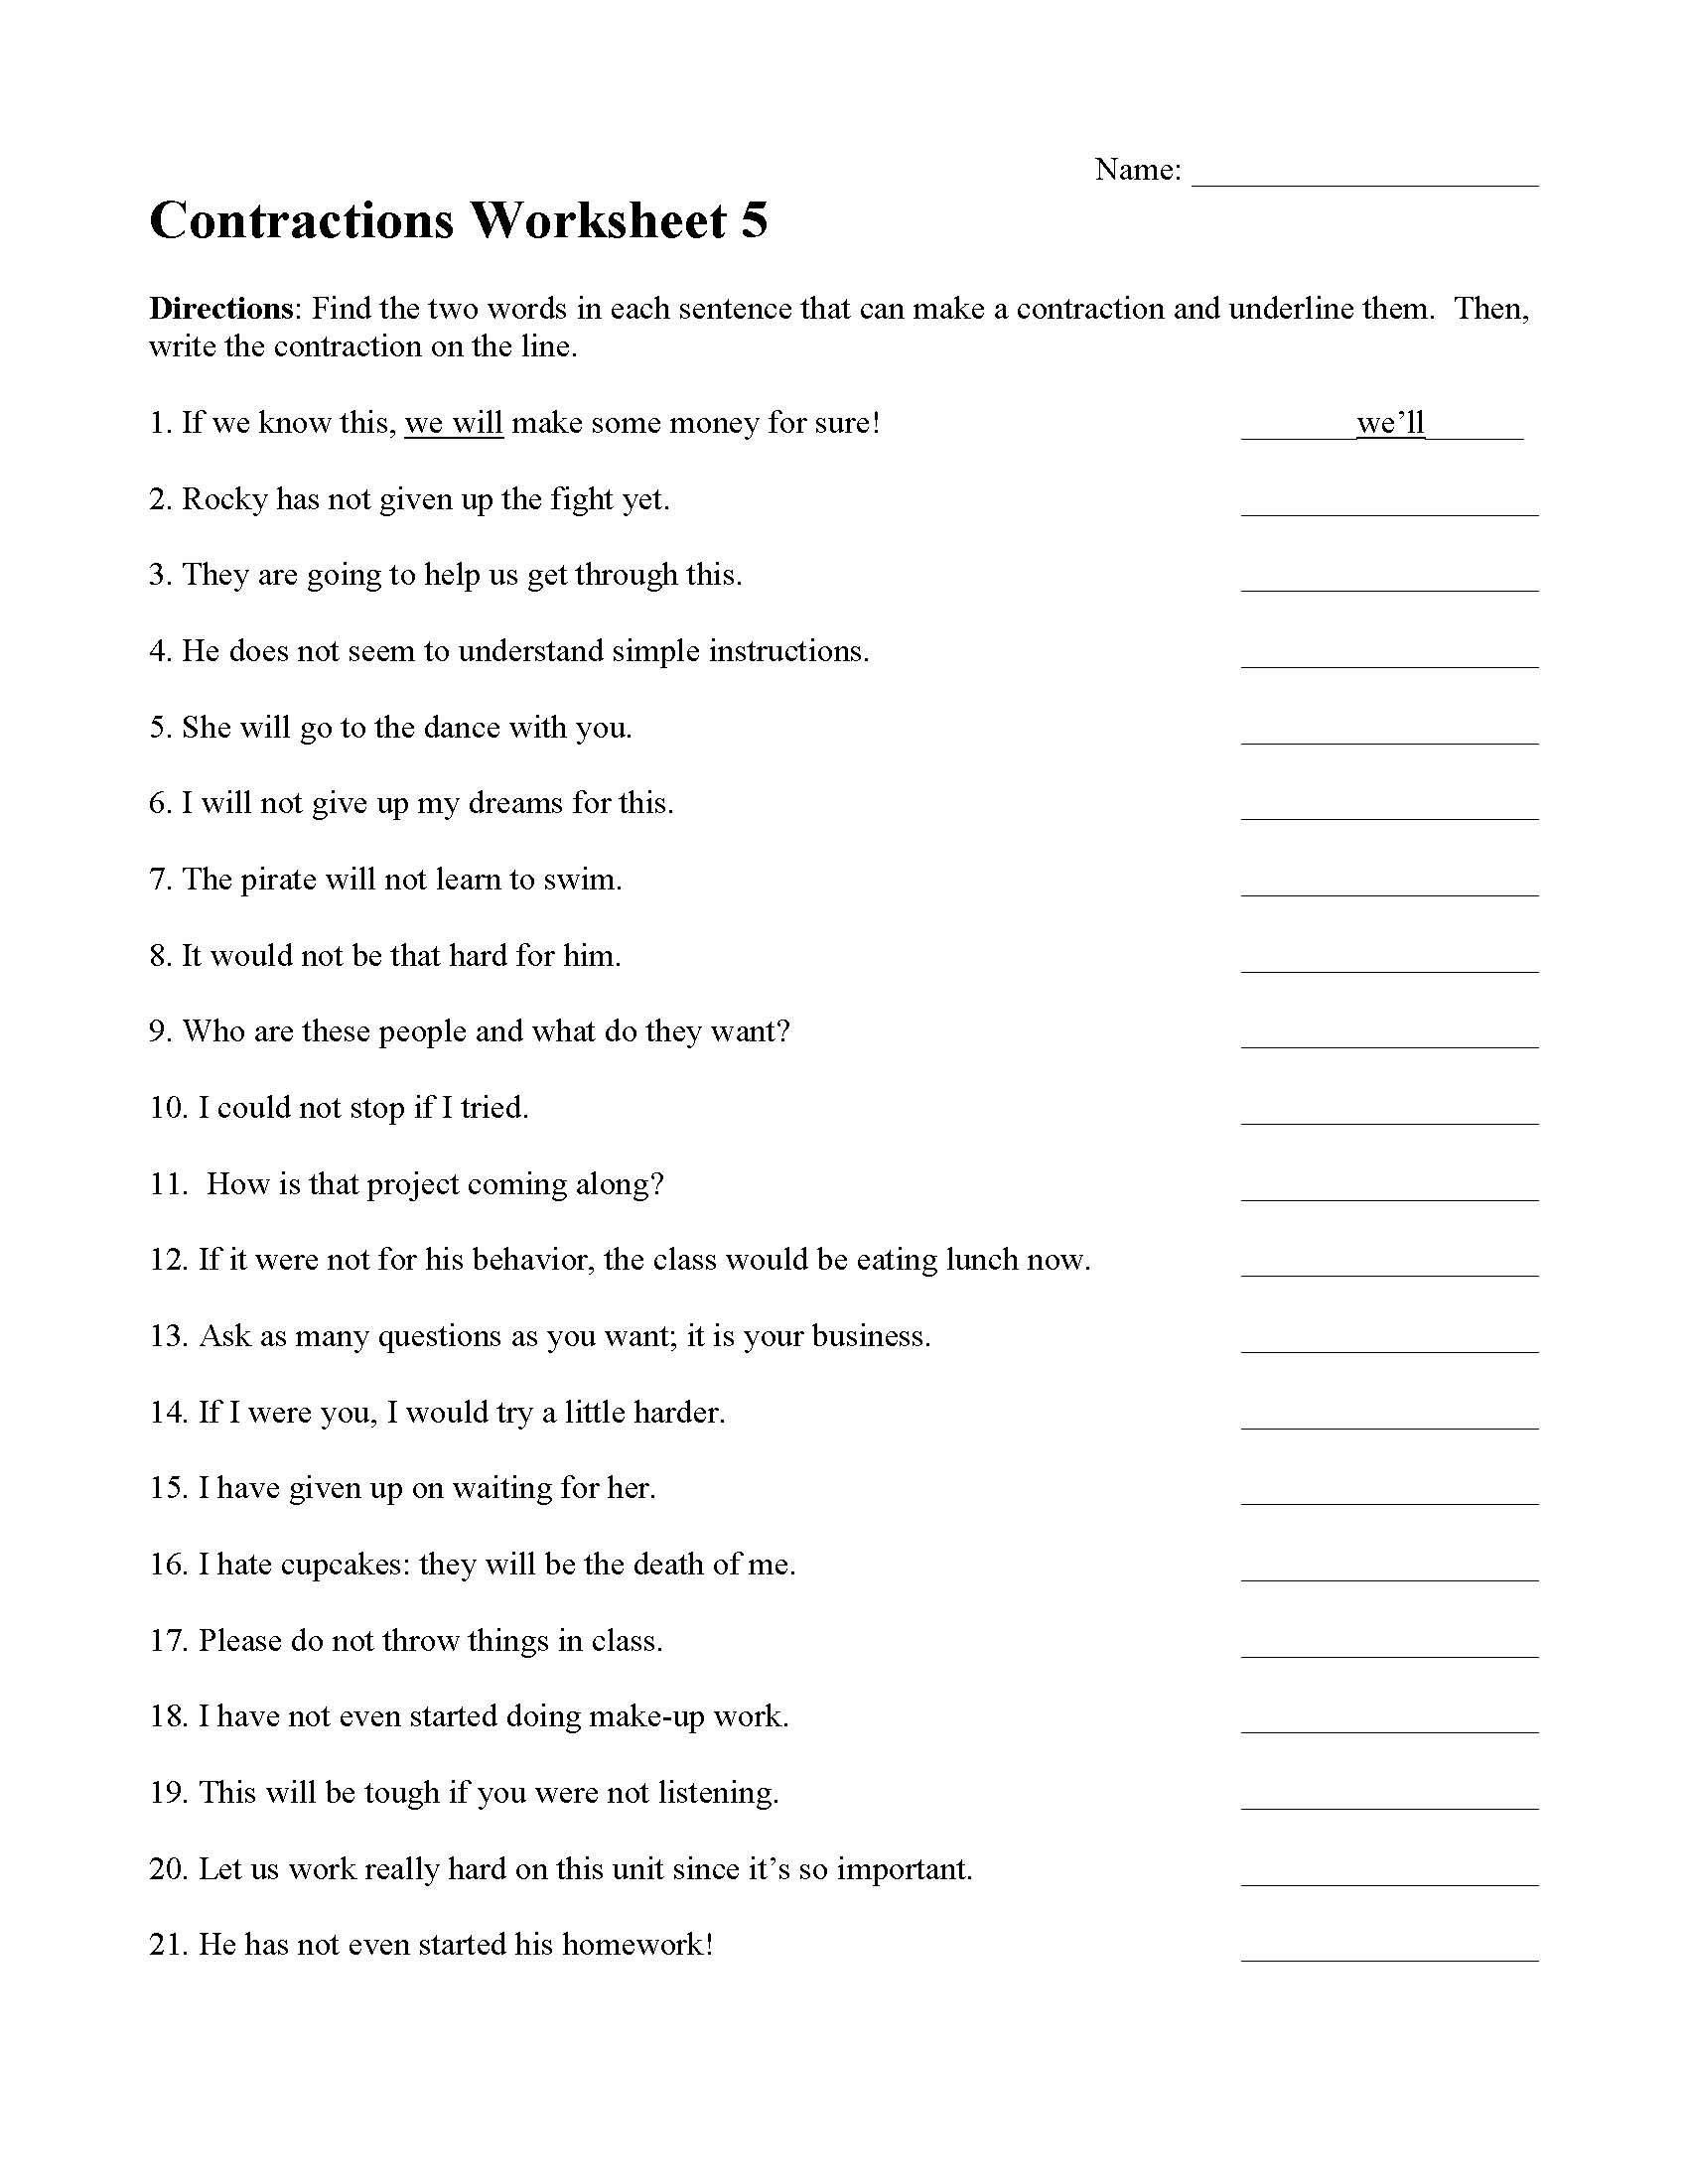 contractions-worksheets-and-activities-language-arts-and-grammar